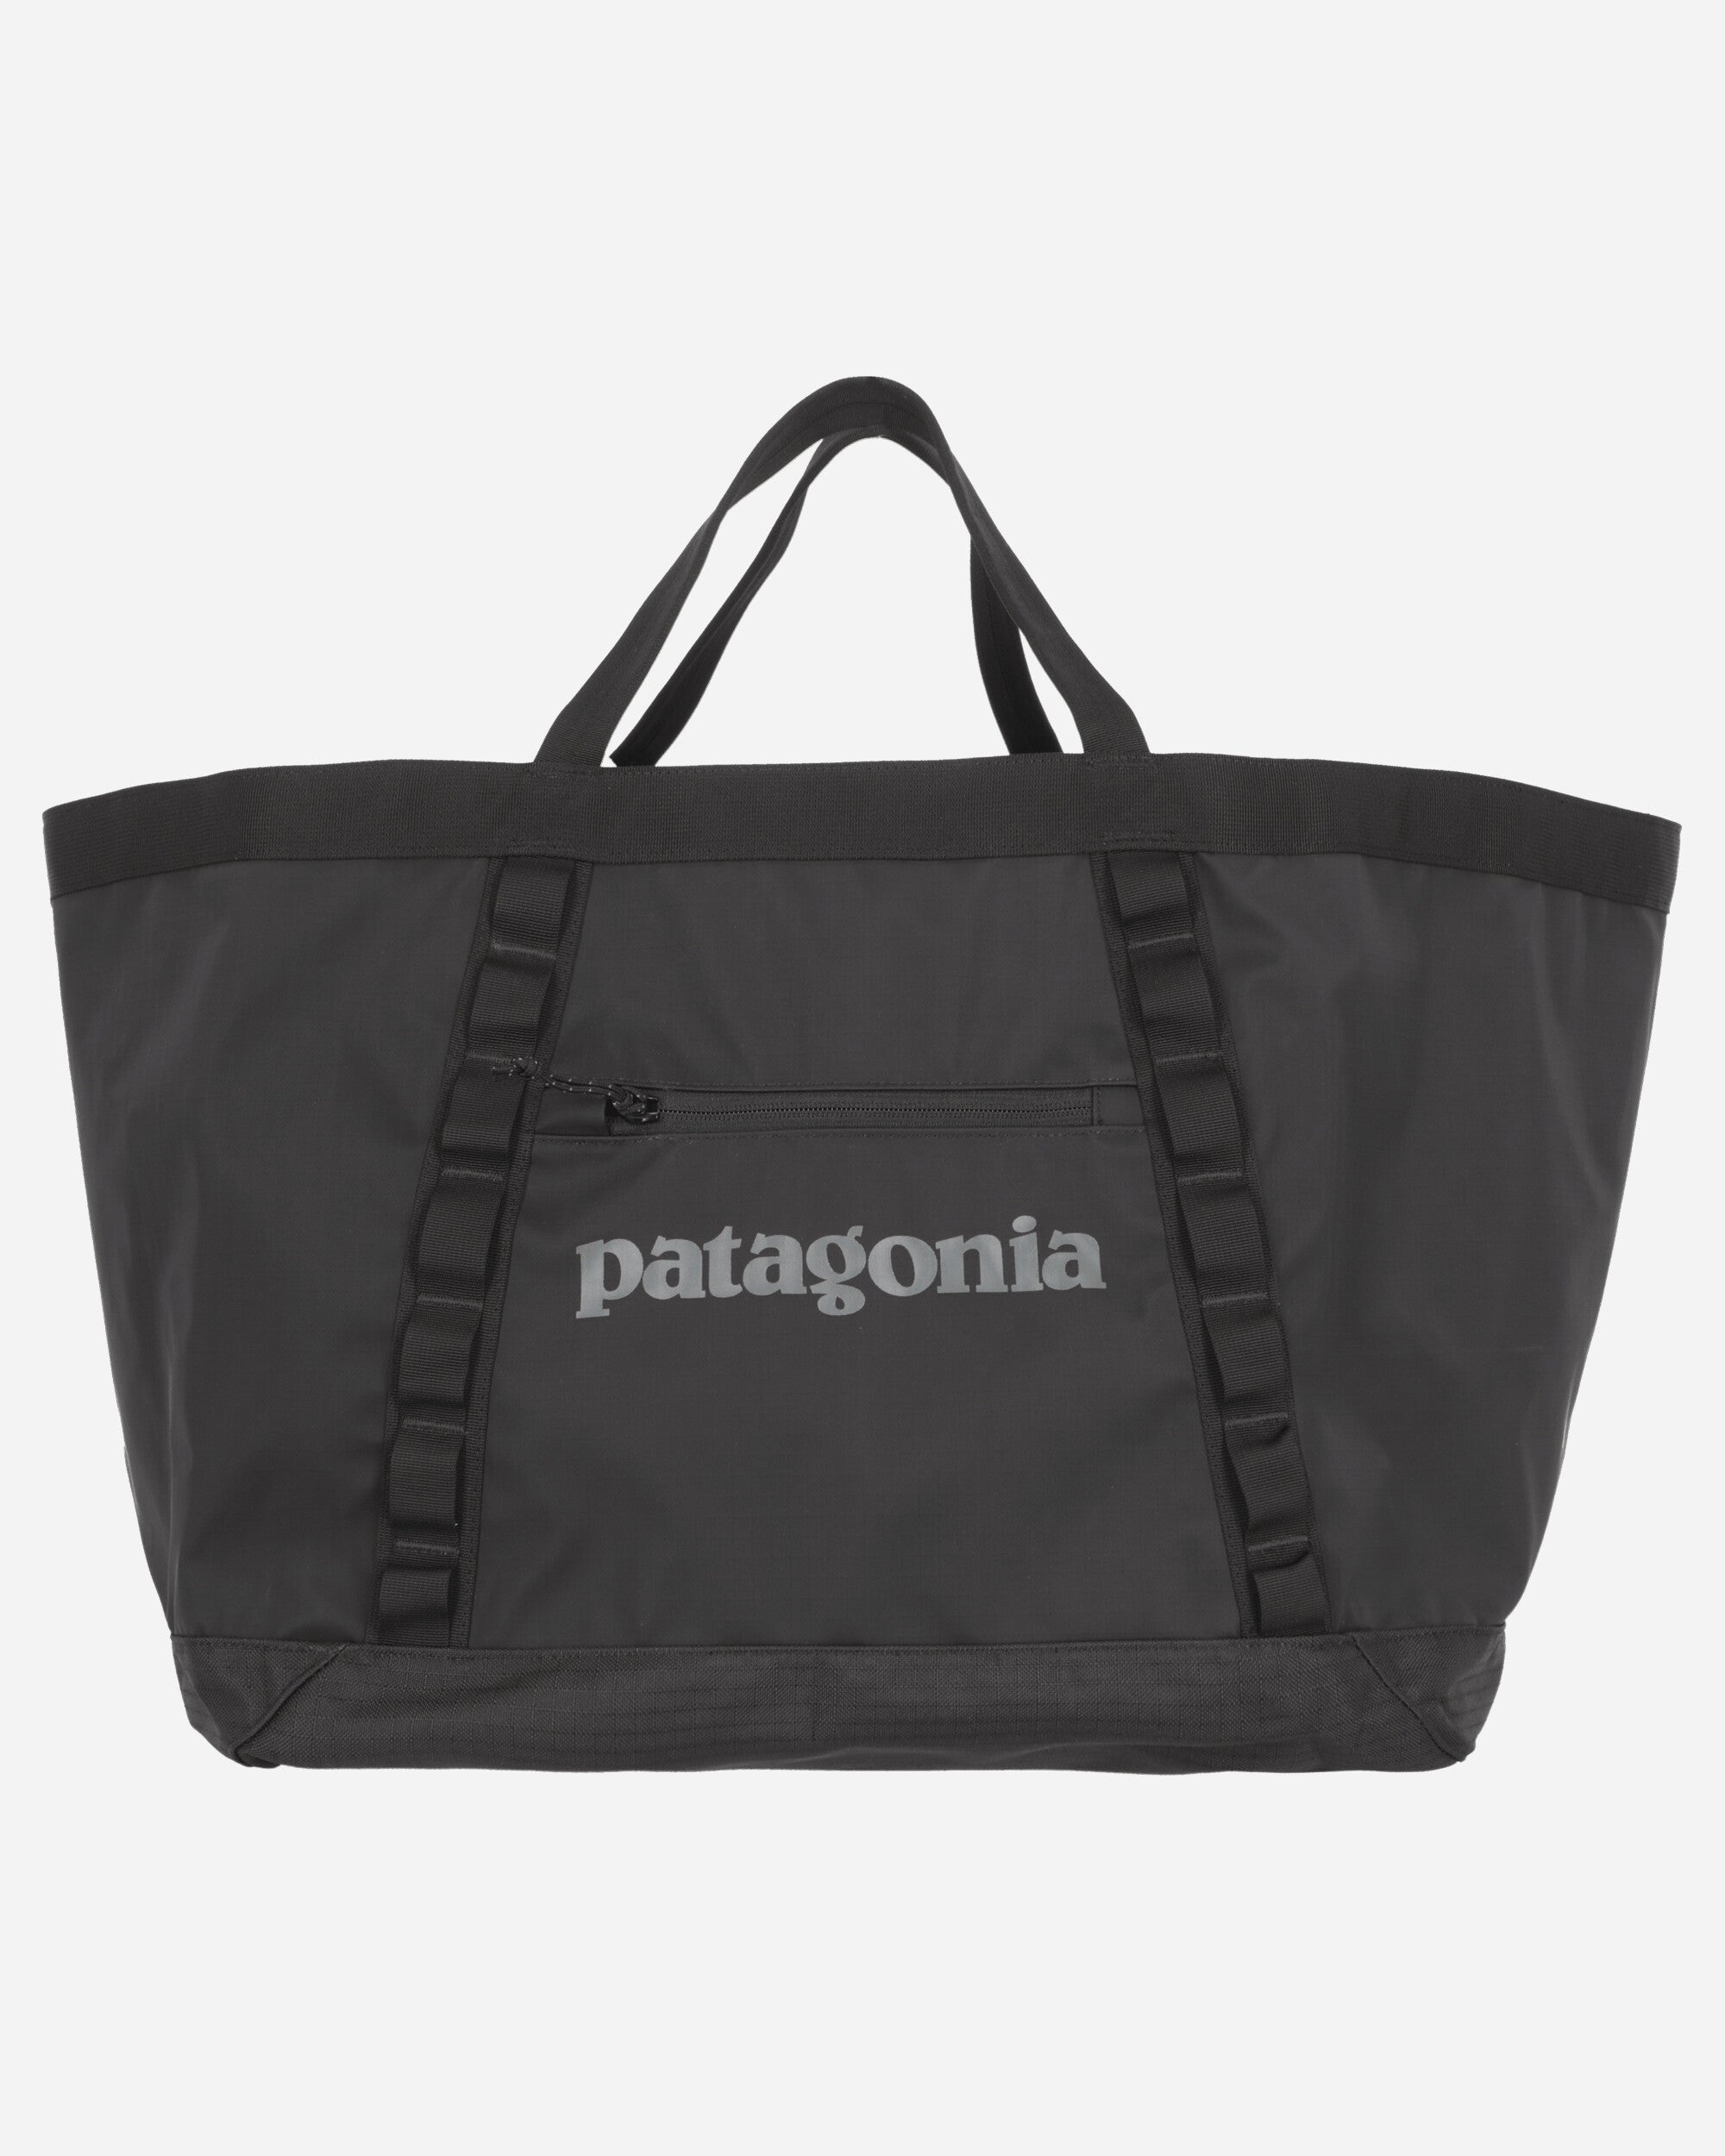  Patagonia Tote, Black, One Size : Clothing, Shoes & Jewelry